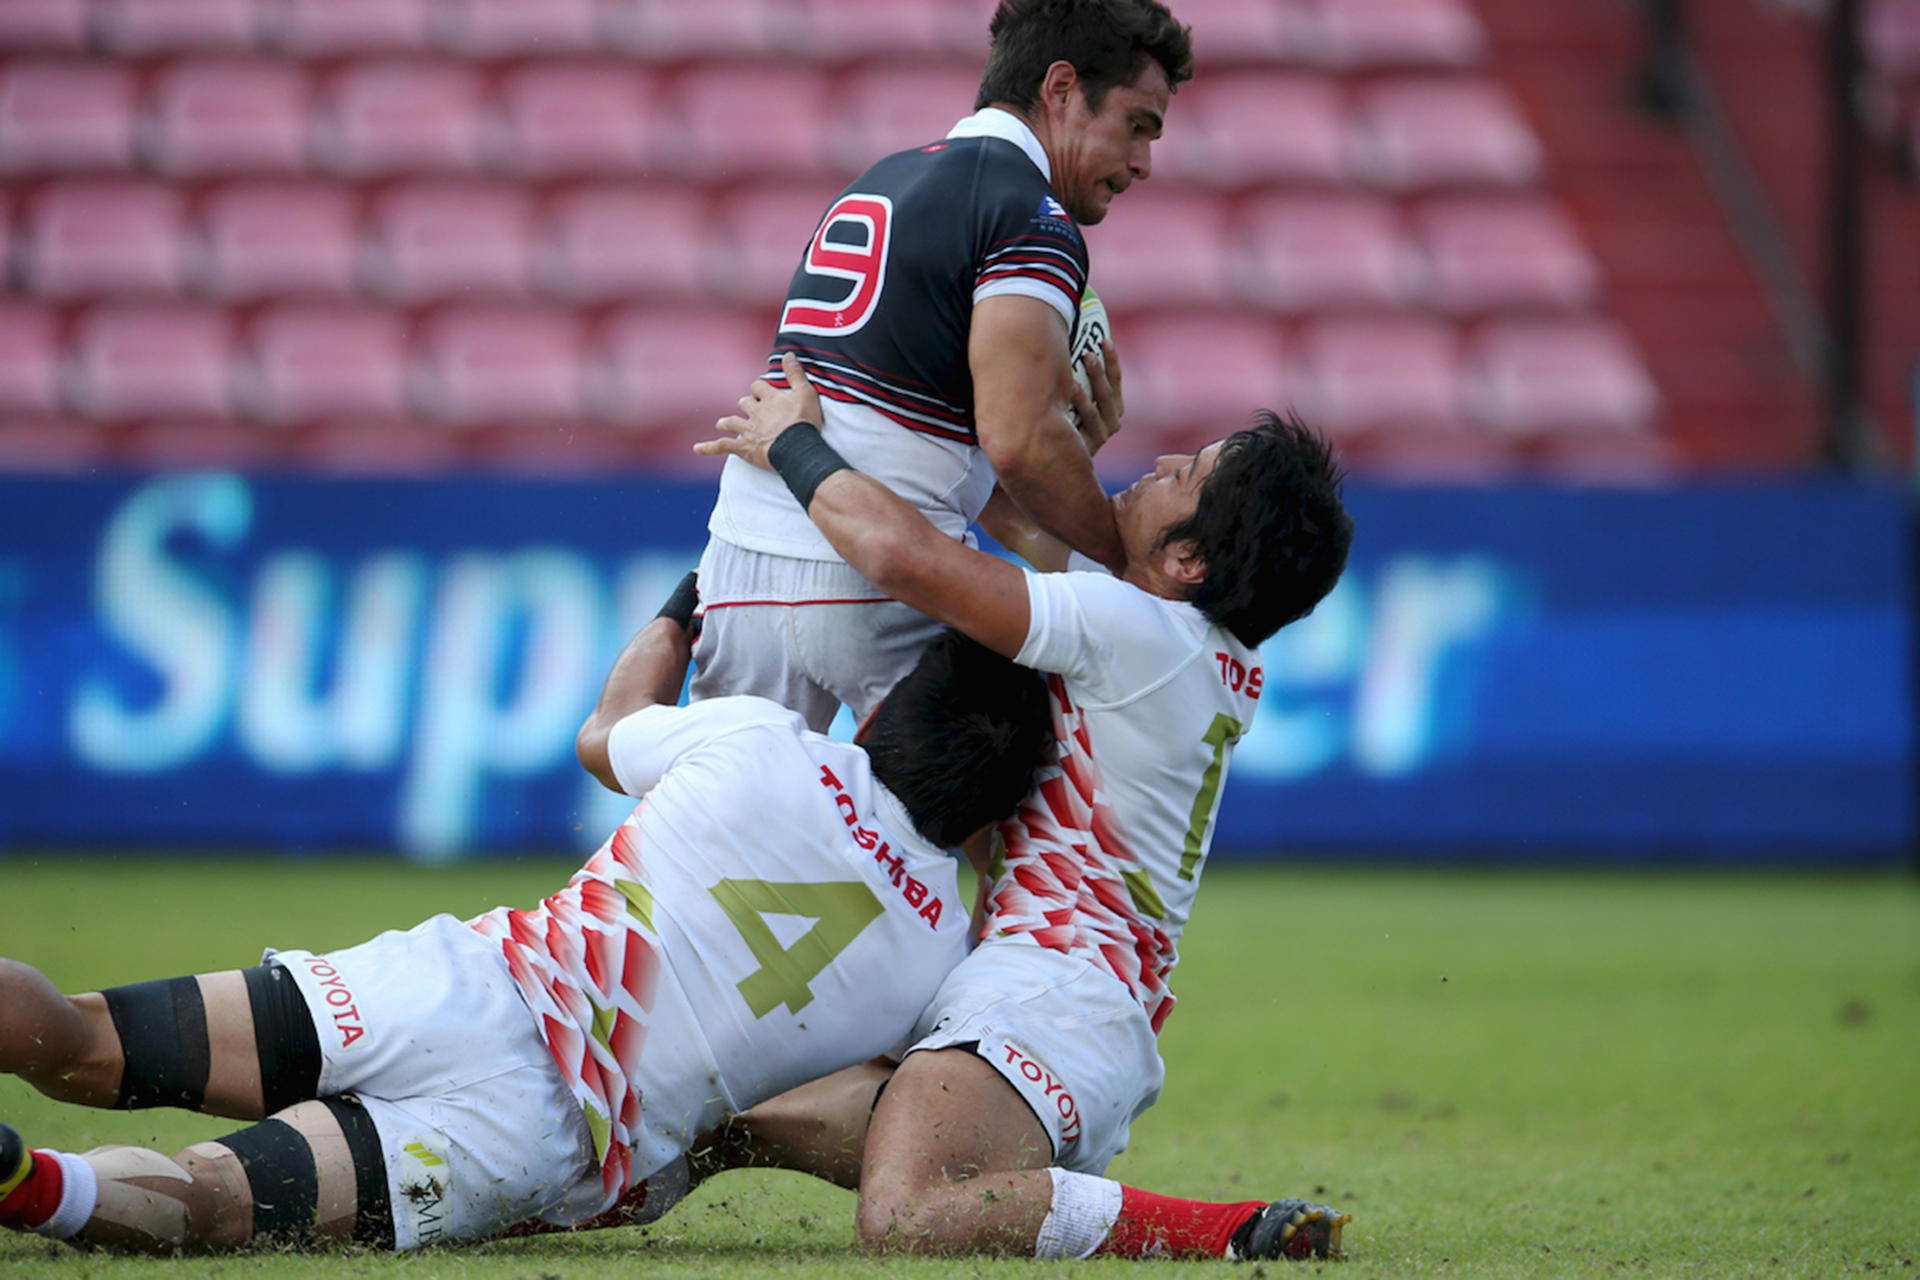 Hong Kong's Rowan Varty is tackled by a pair of Japanese players in their Cup semi-final at the Thailand Sevens. Photos: Asia Rugby